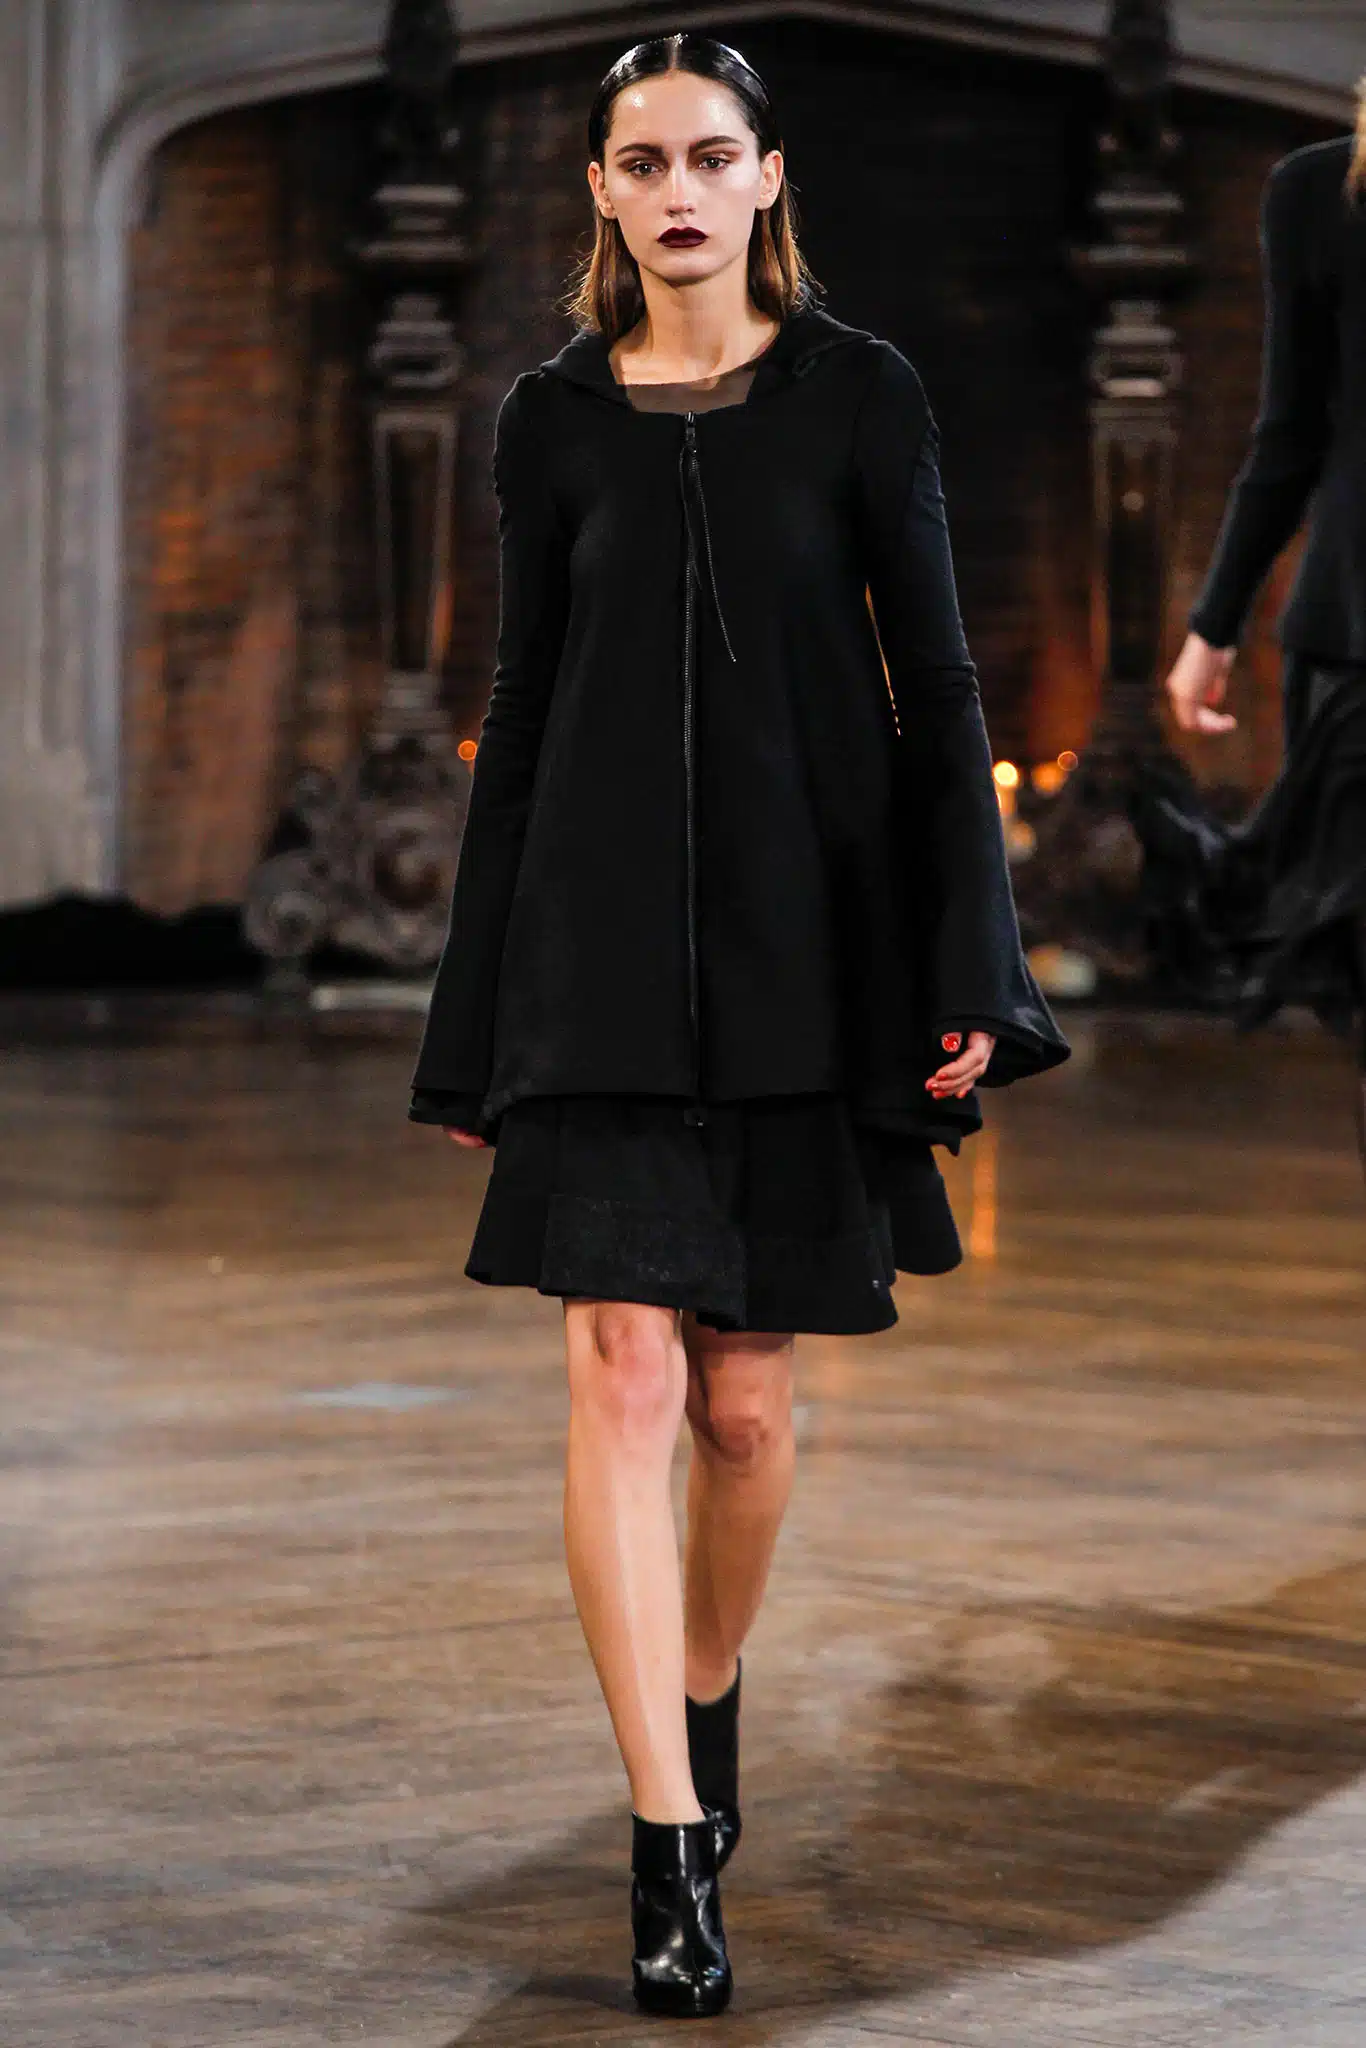 Image from FW14 SHOW Collection